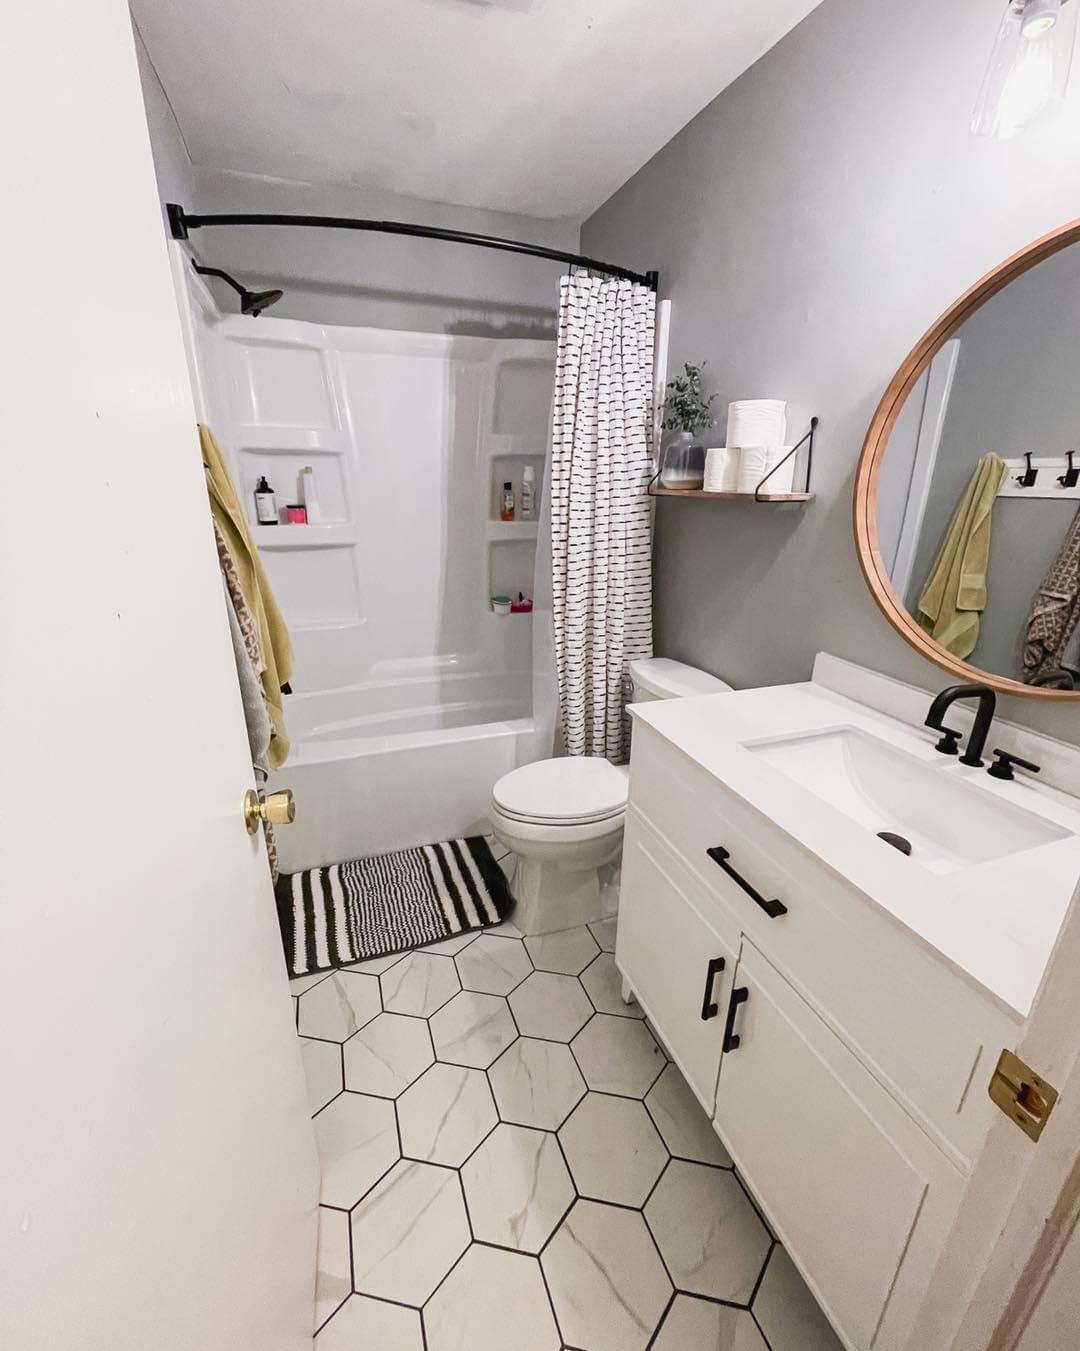 Midwest Remodel: Creating functional and stylish bathrooms is our specialty!